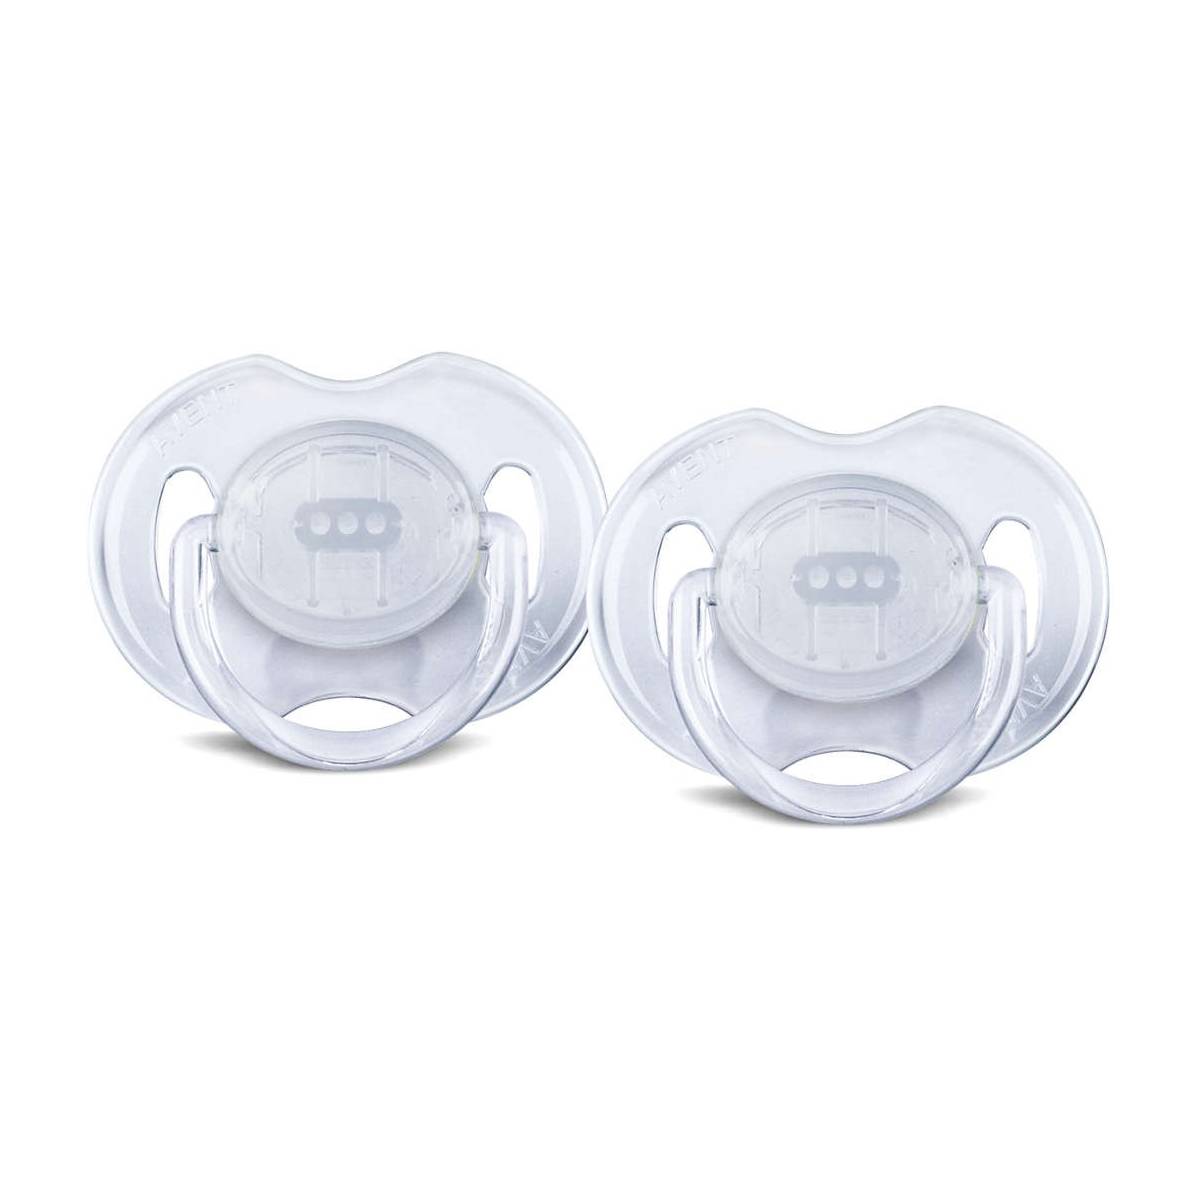 Sucettes Philips Avent Ultra Air 0-6 mois pack de 4 - MaxxiDiscount